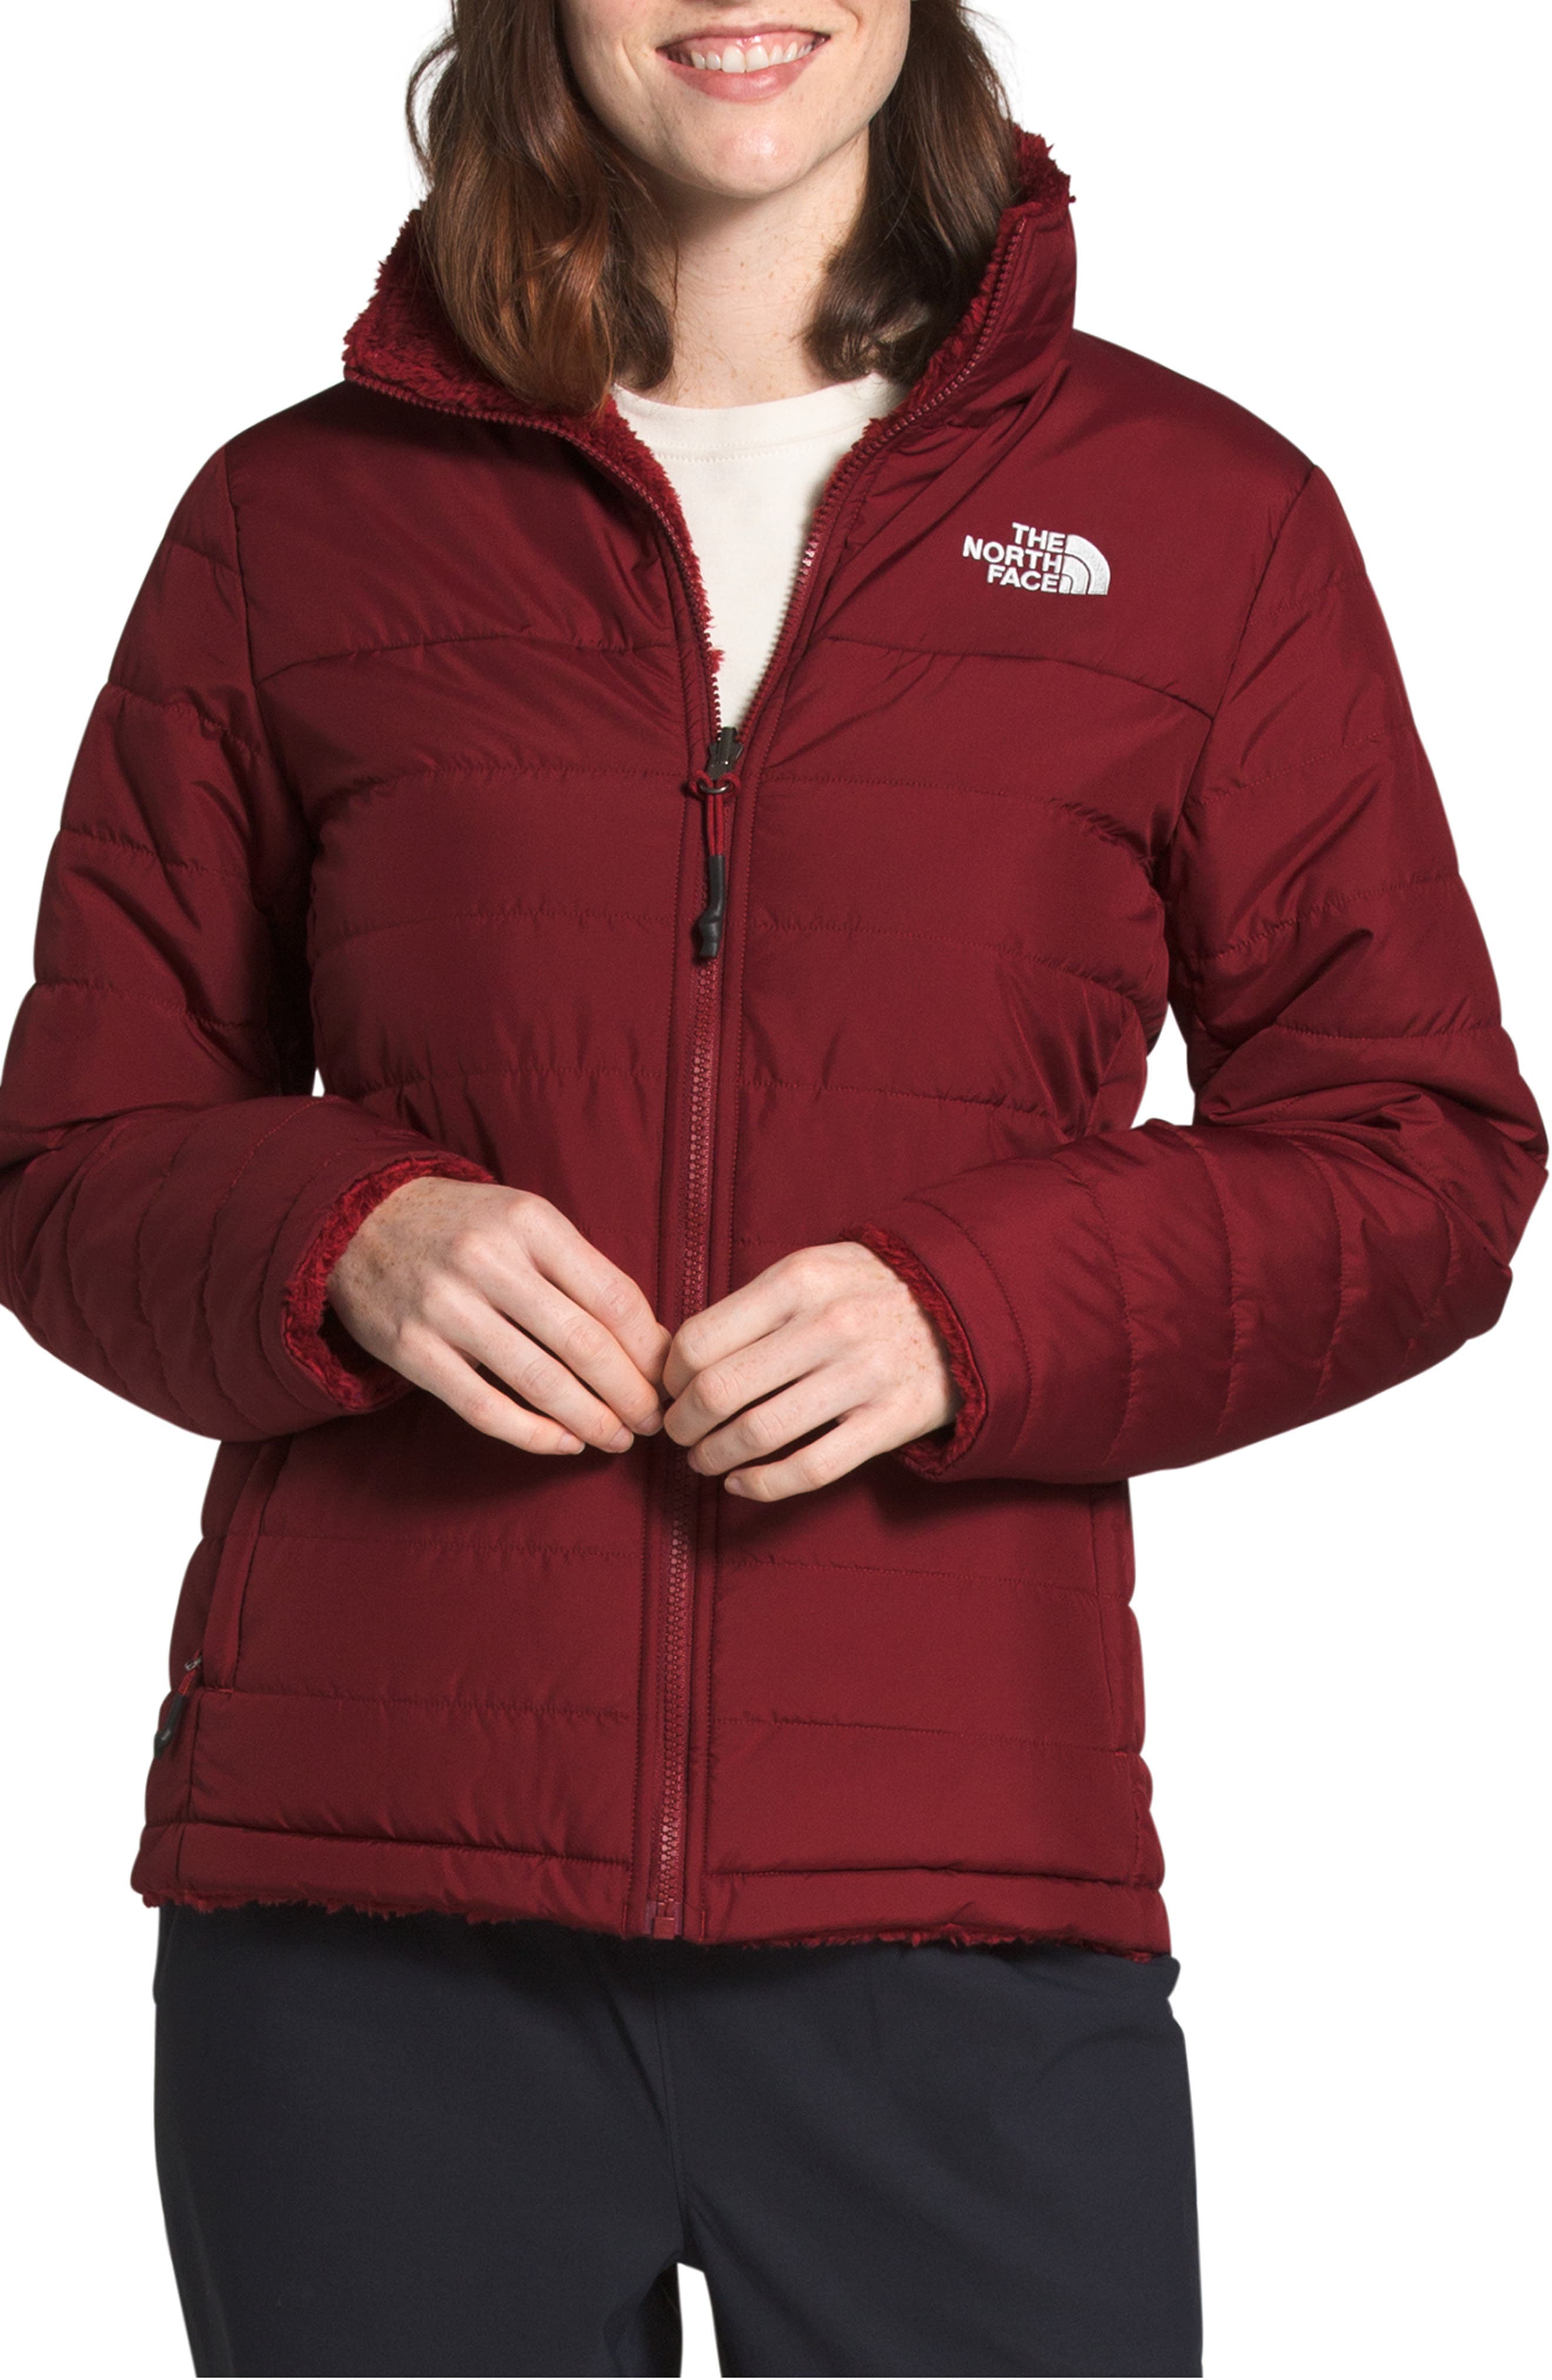 north face women's reversible jacket